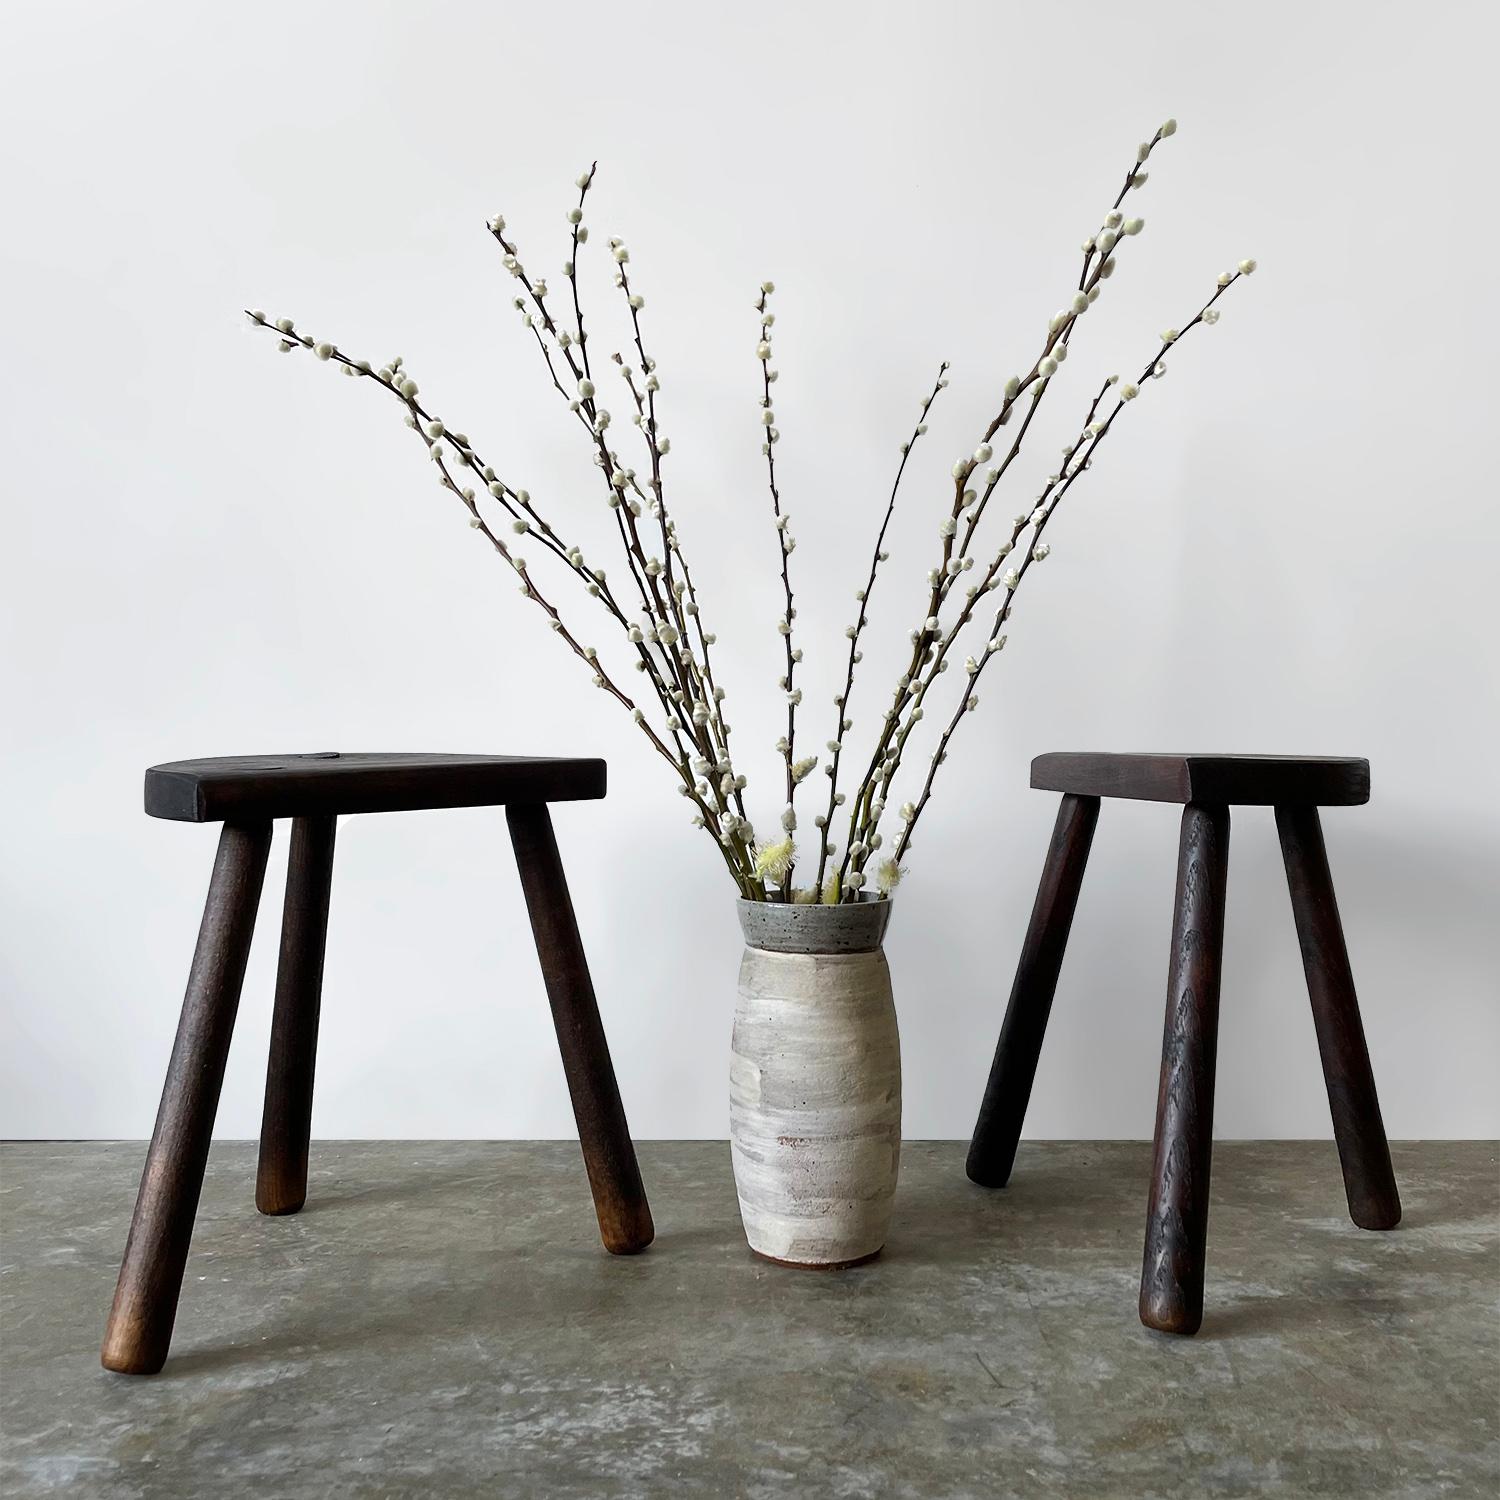 French half moon tripod stool
France, mid century
Beautifully sculpted, handcrafted woodwork
Solid wood half moon seat rests on tripod legs
Original wood finish with lovely grain detail and joinery
Patina from age and use
Priced and sold